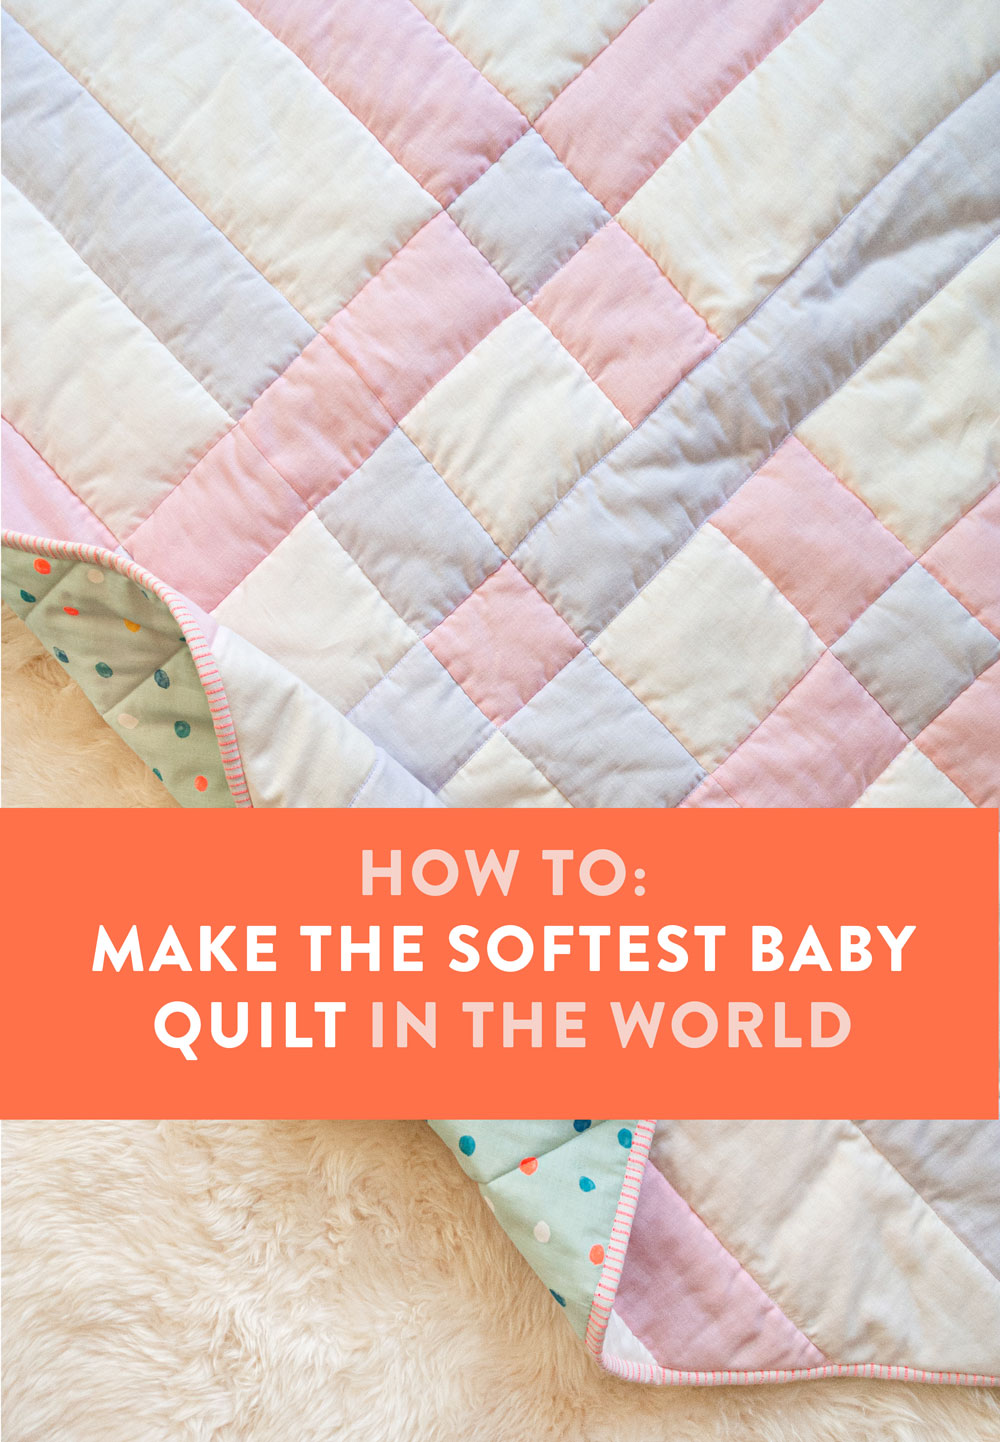 How to make the softest baby quilt in the world! The answer is to quilt with double gauze and wool batting – a sewing tutorial on how to do both! suzyquilts.com #babyquiltpattern #quiltbindingtutorial